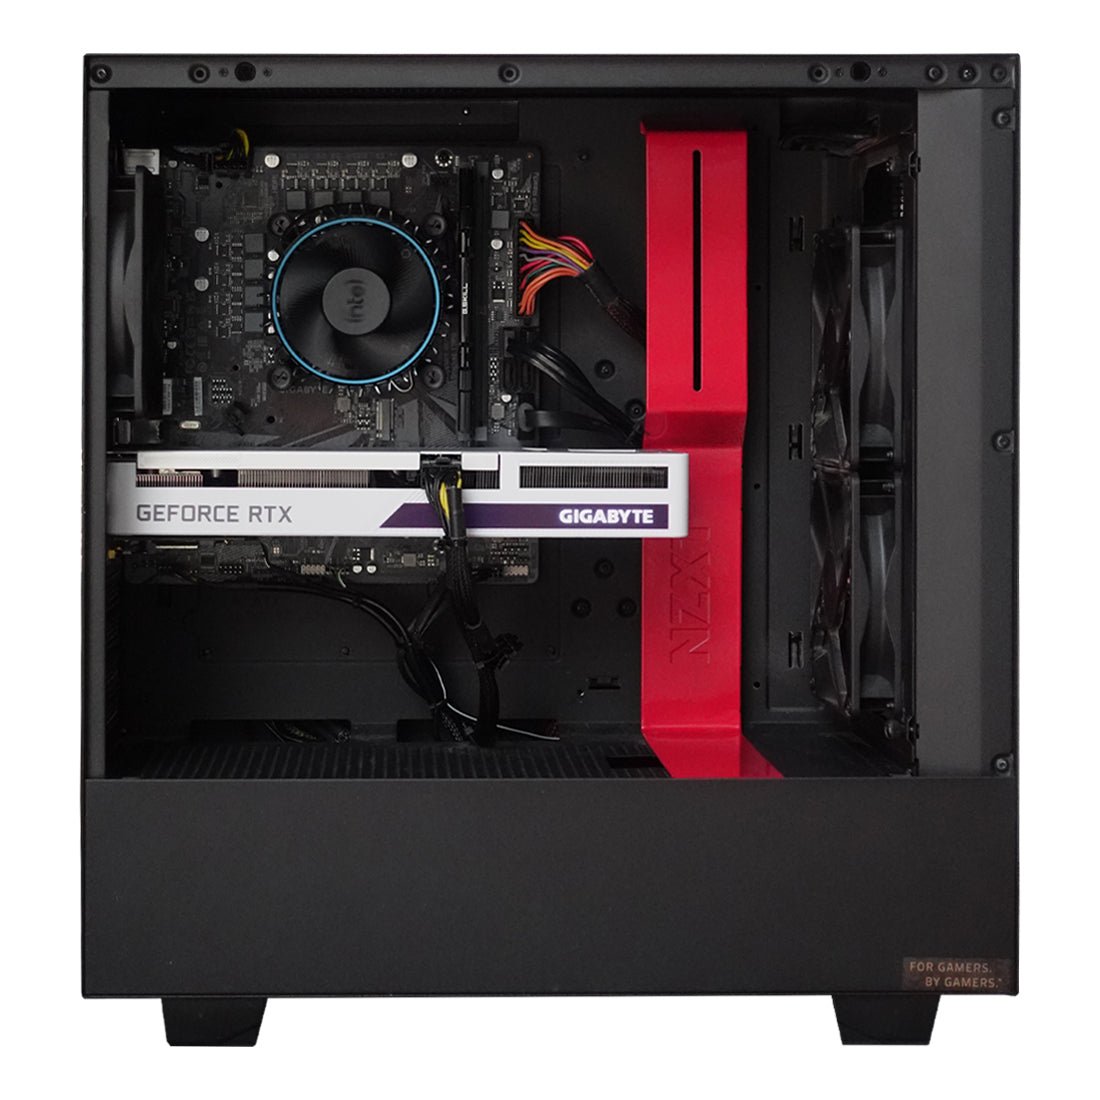 (Pre-Owned) Gaming PC Intel Core i5-13400F w/ Gigabyte RTX 3060 Vision OC & NZXT H510 - Black - كمبيوتر مستعمل - Store 974 | ستور ٩٧٤